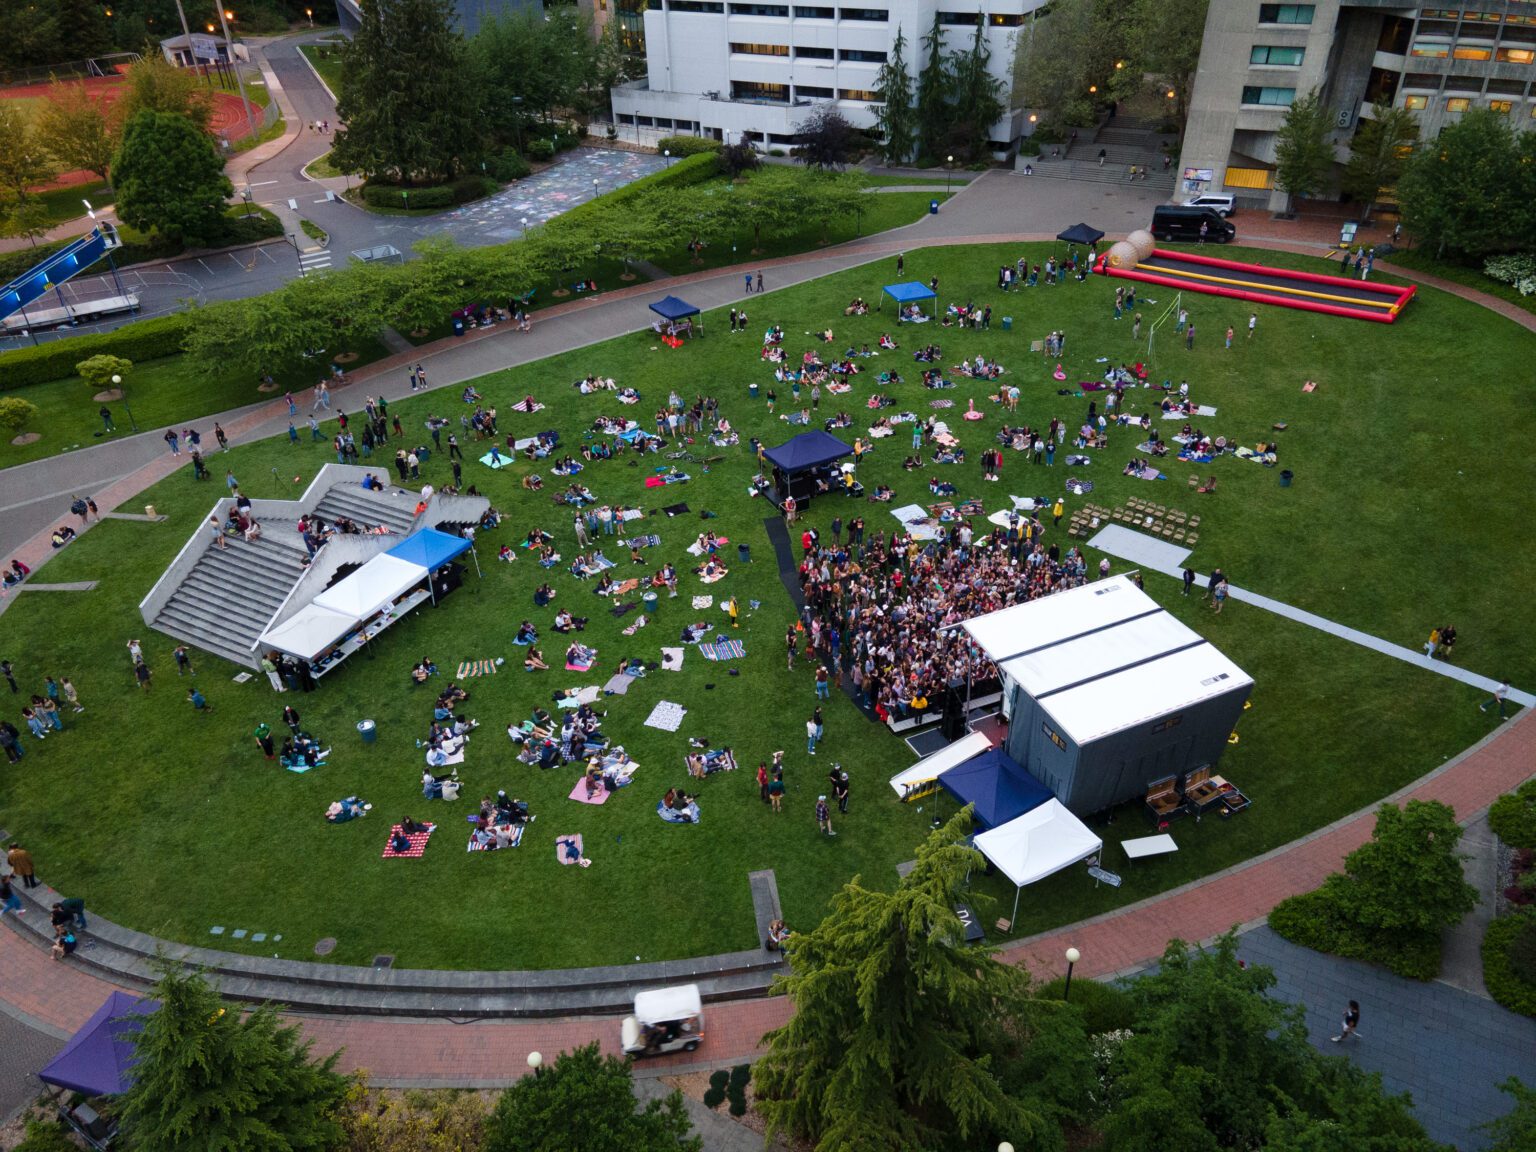 Students cover the lawn and crowd around the stage as the Naked Giants close Lawnstock 2022 at Western Washington University in June. The annual event is put on by Western's Associated Students